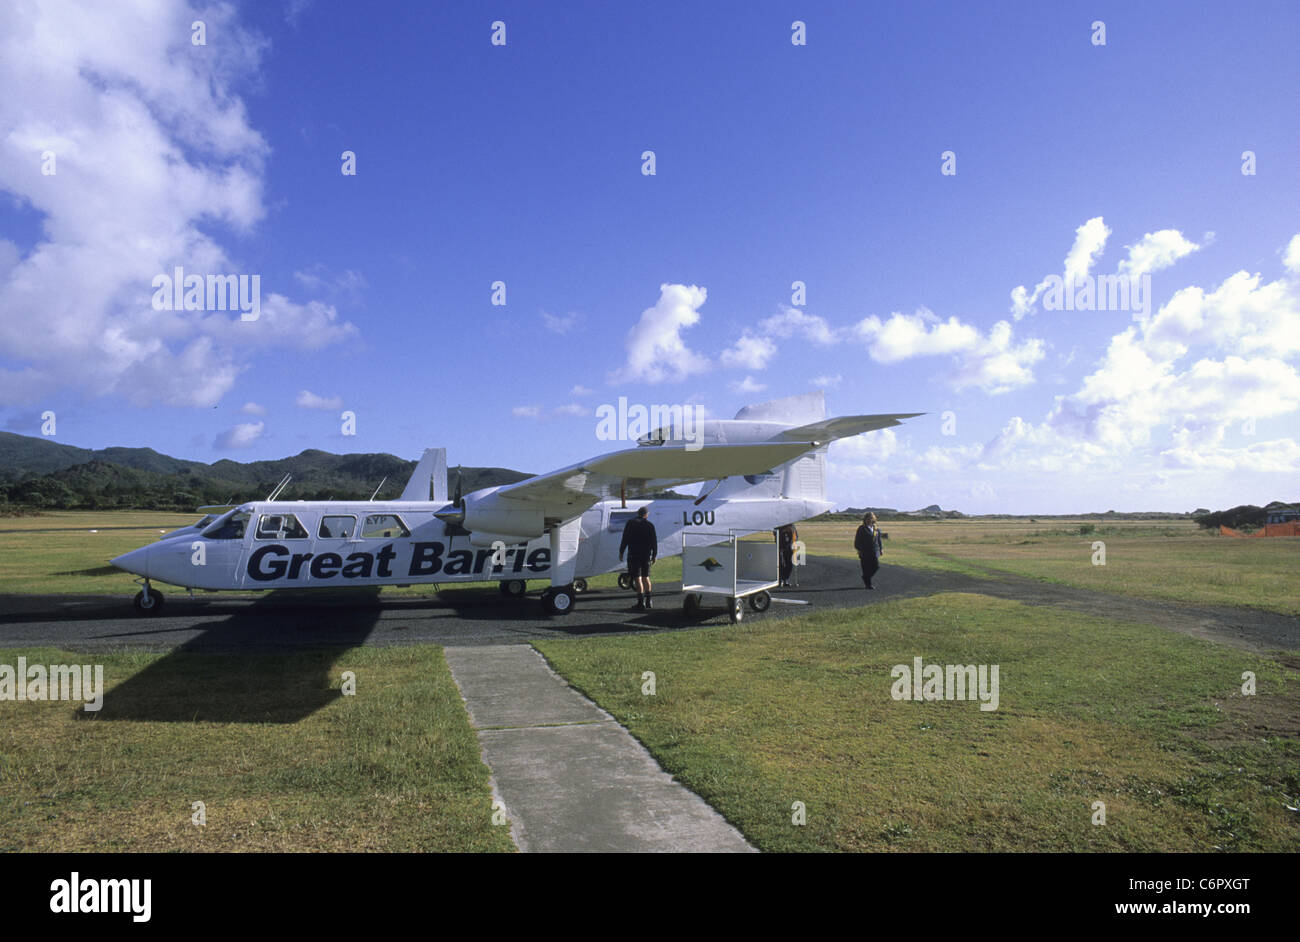 great barrier air plane ready to depart to auckland, new zealand Stock Photo